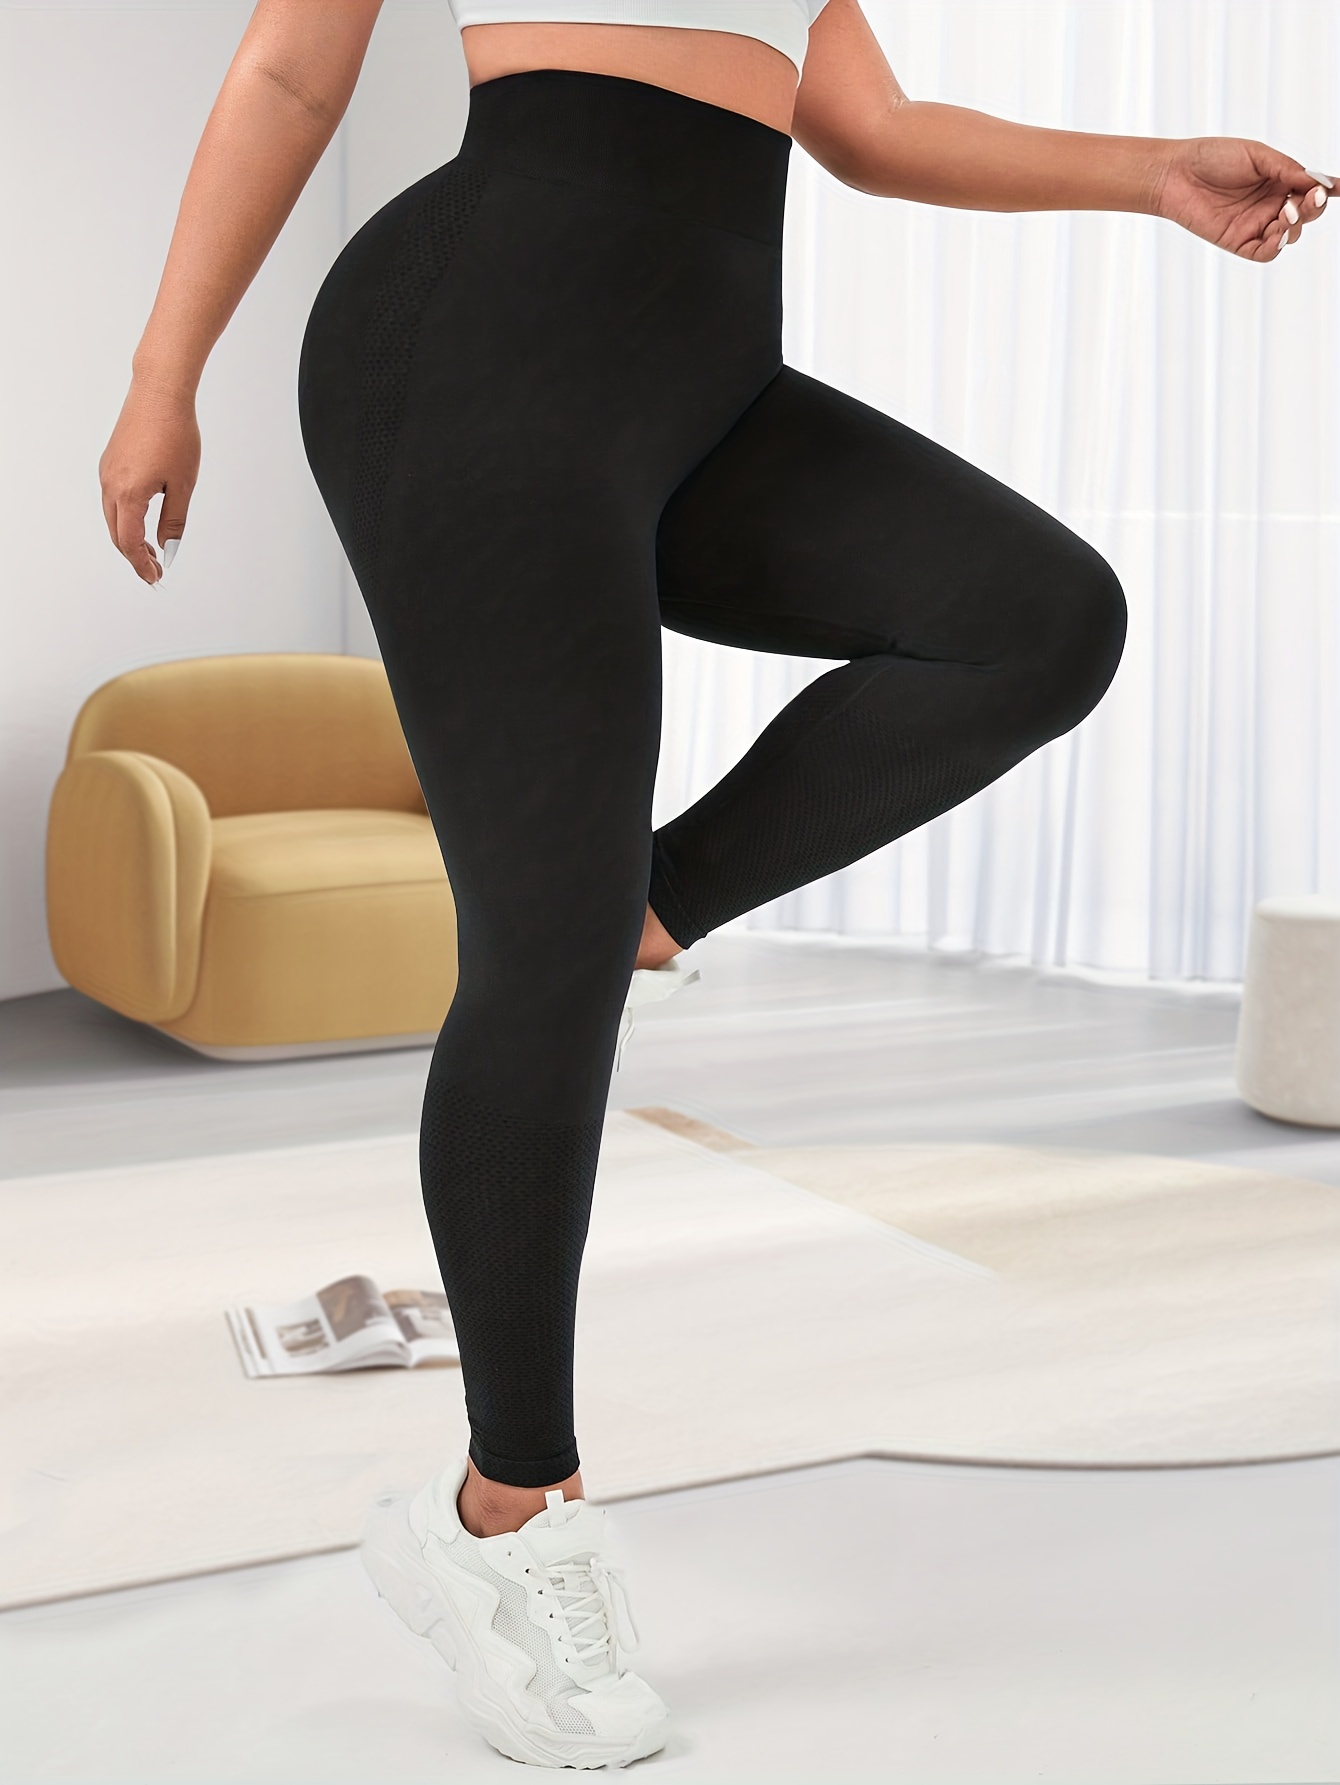 Plus Size Womens Yoga Pants Leggings With Pocket Gym Fitness Sport